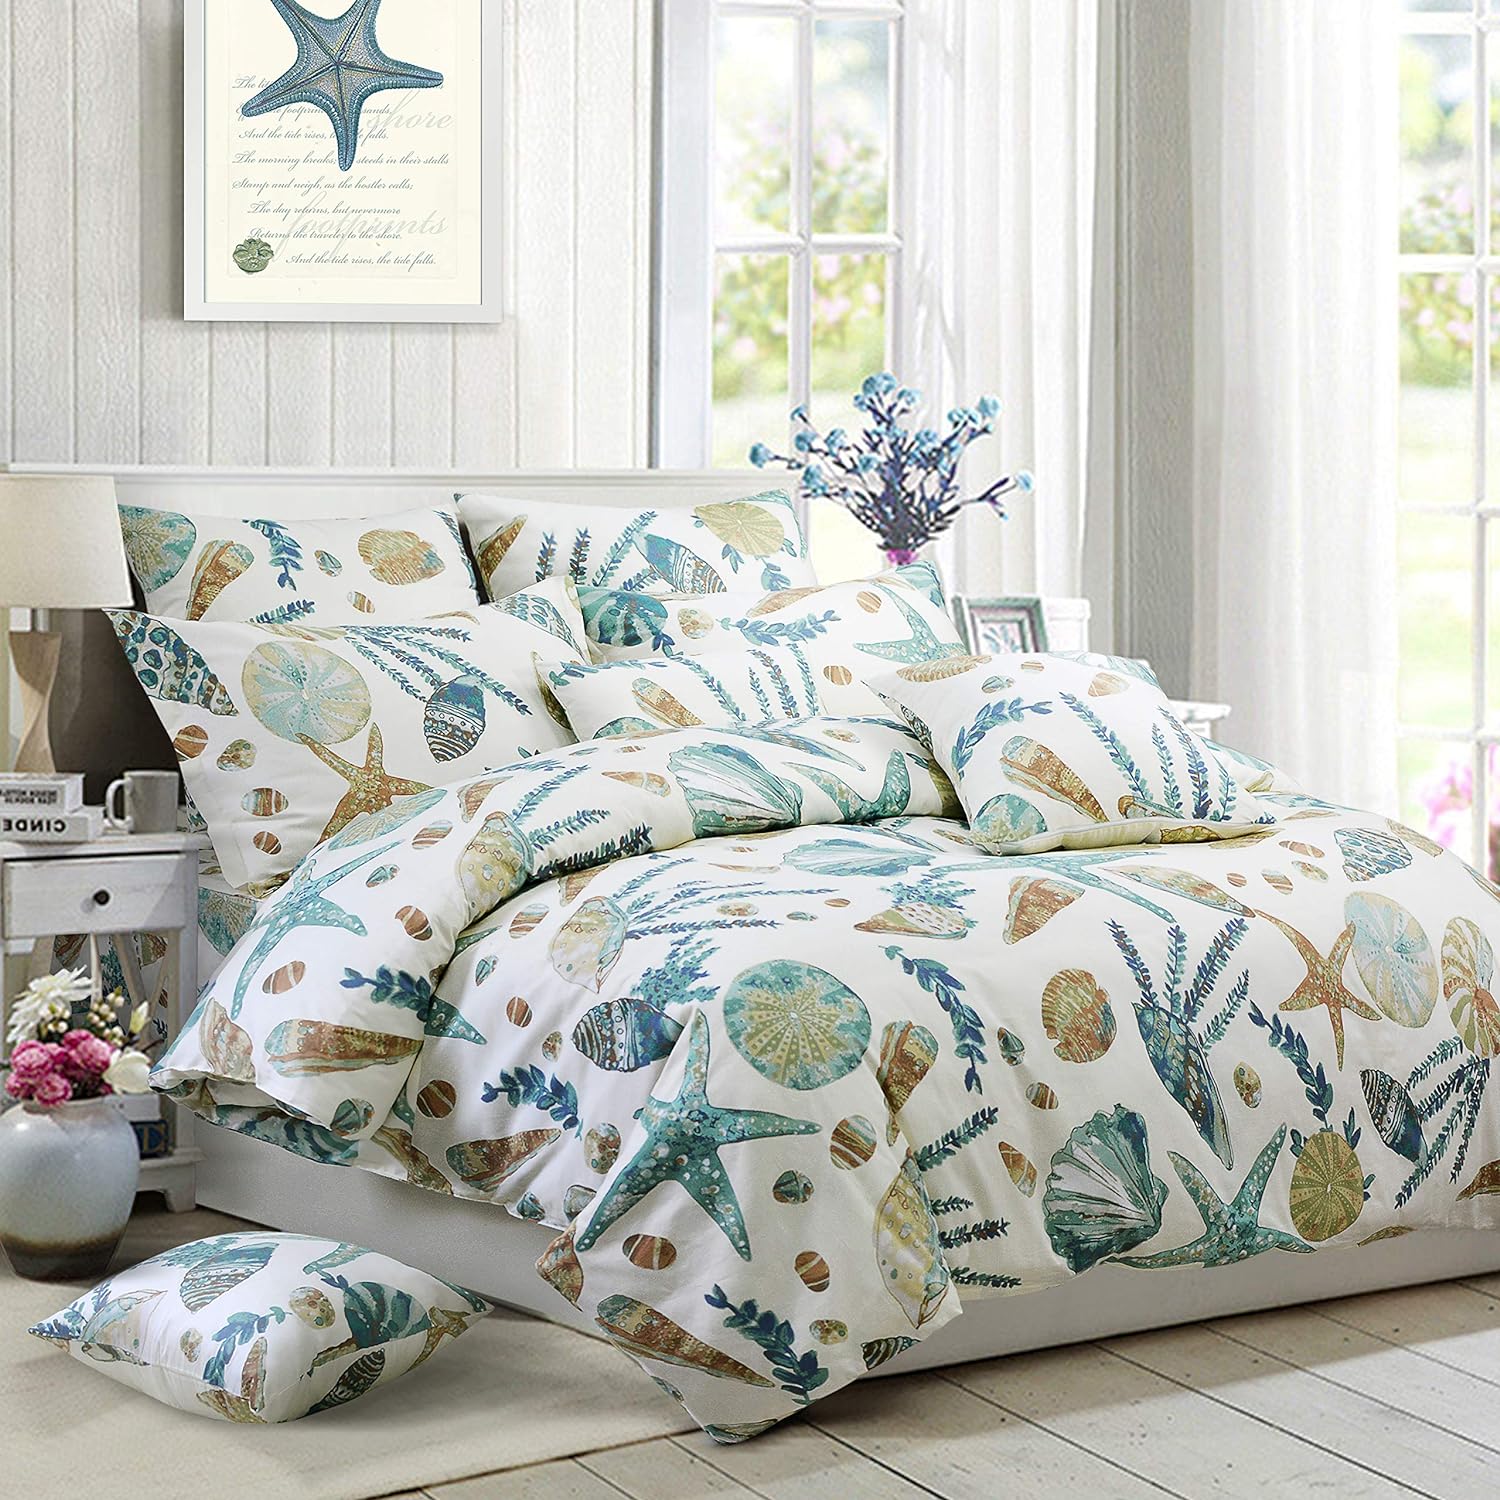 TKM Home Duvet Cover Set Queen Beach Themed Bedding Sets 100% Cotton Super Soft Coastal Bedding White Teal Seashells And Star…